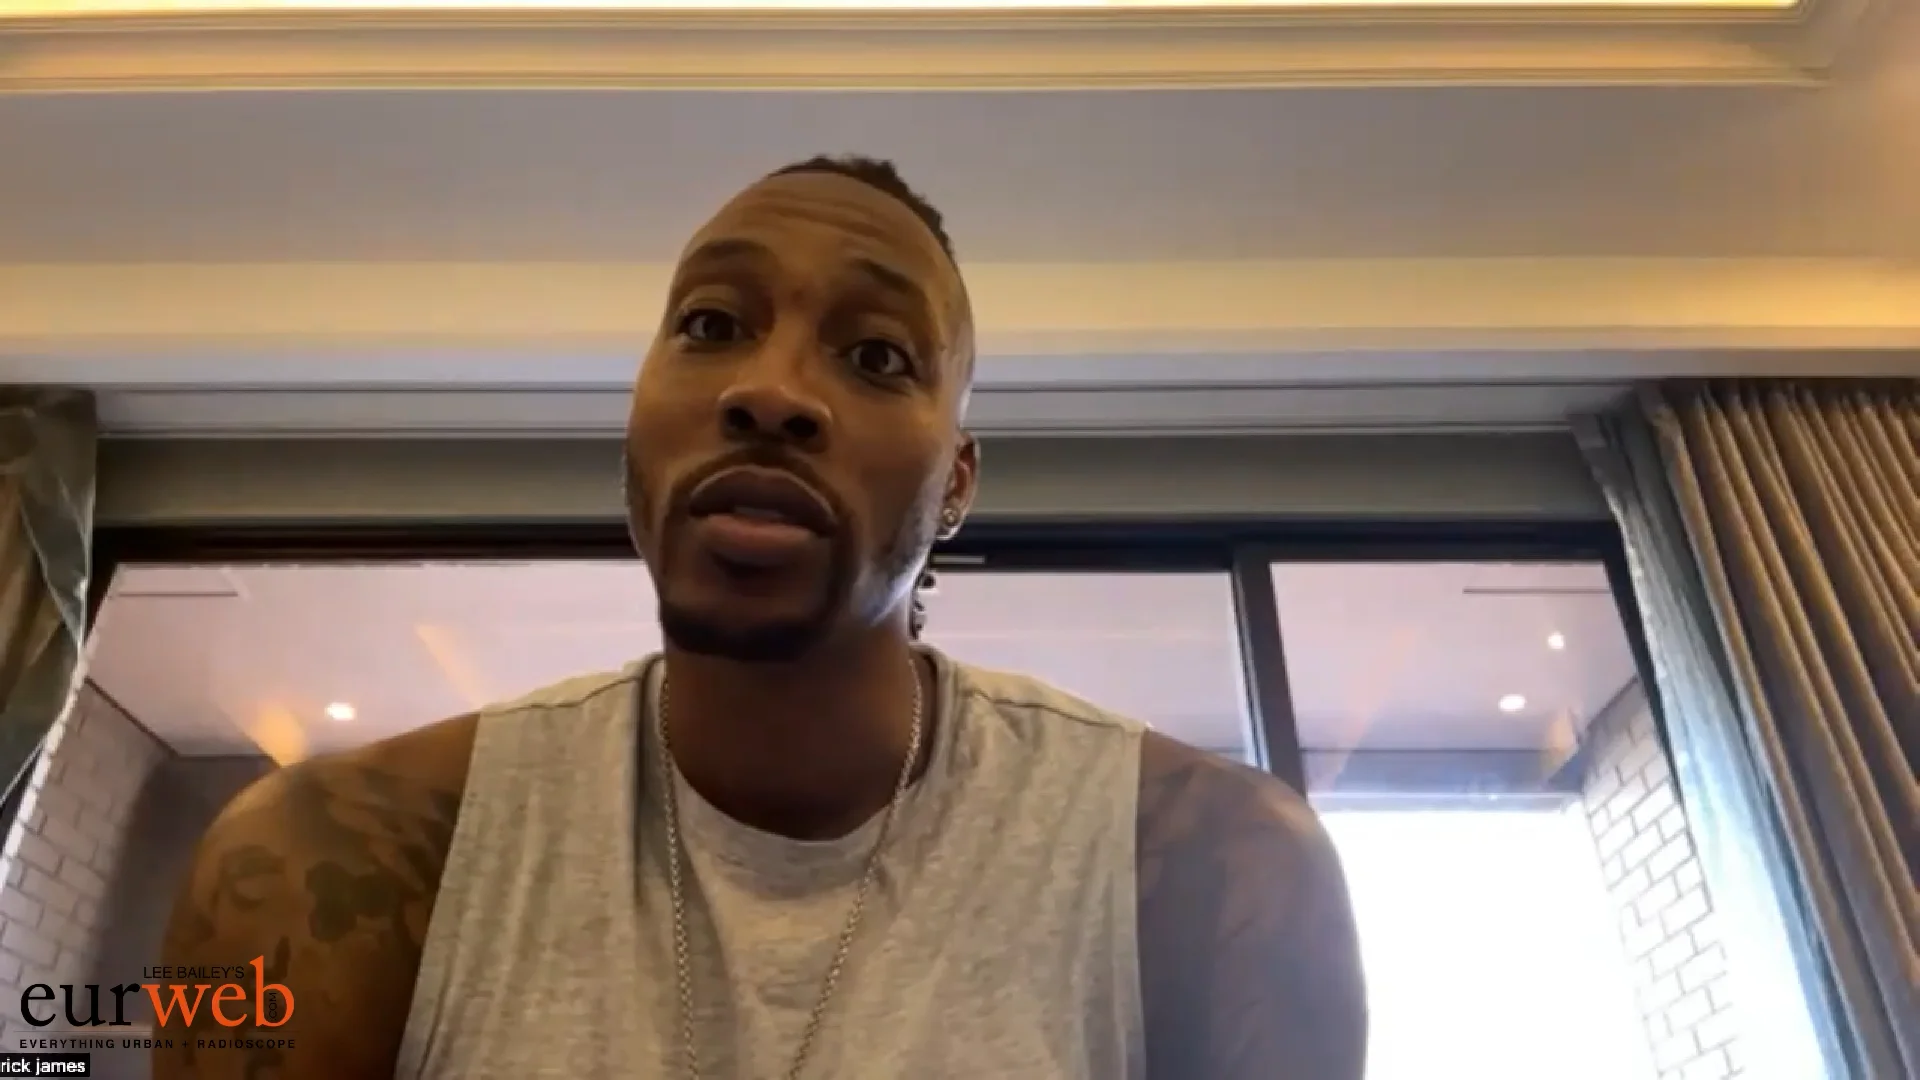 Dwight Howard Says 'Special Forces' Was 'Greatest Experience of My